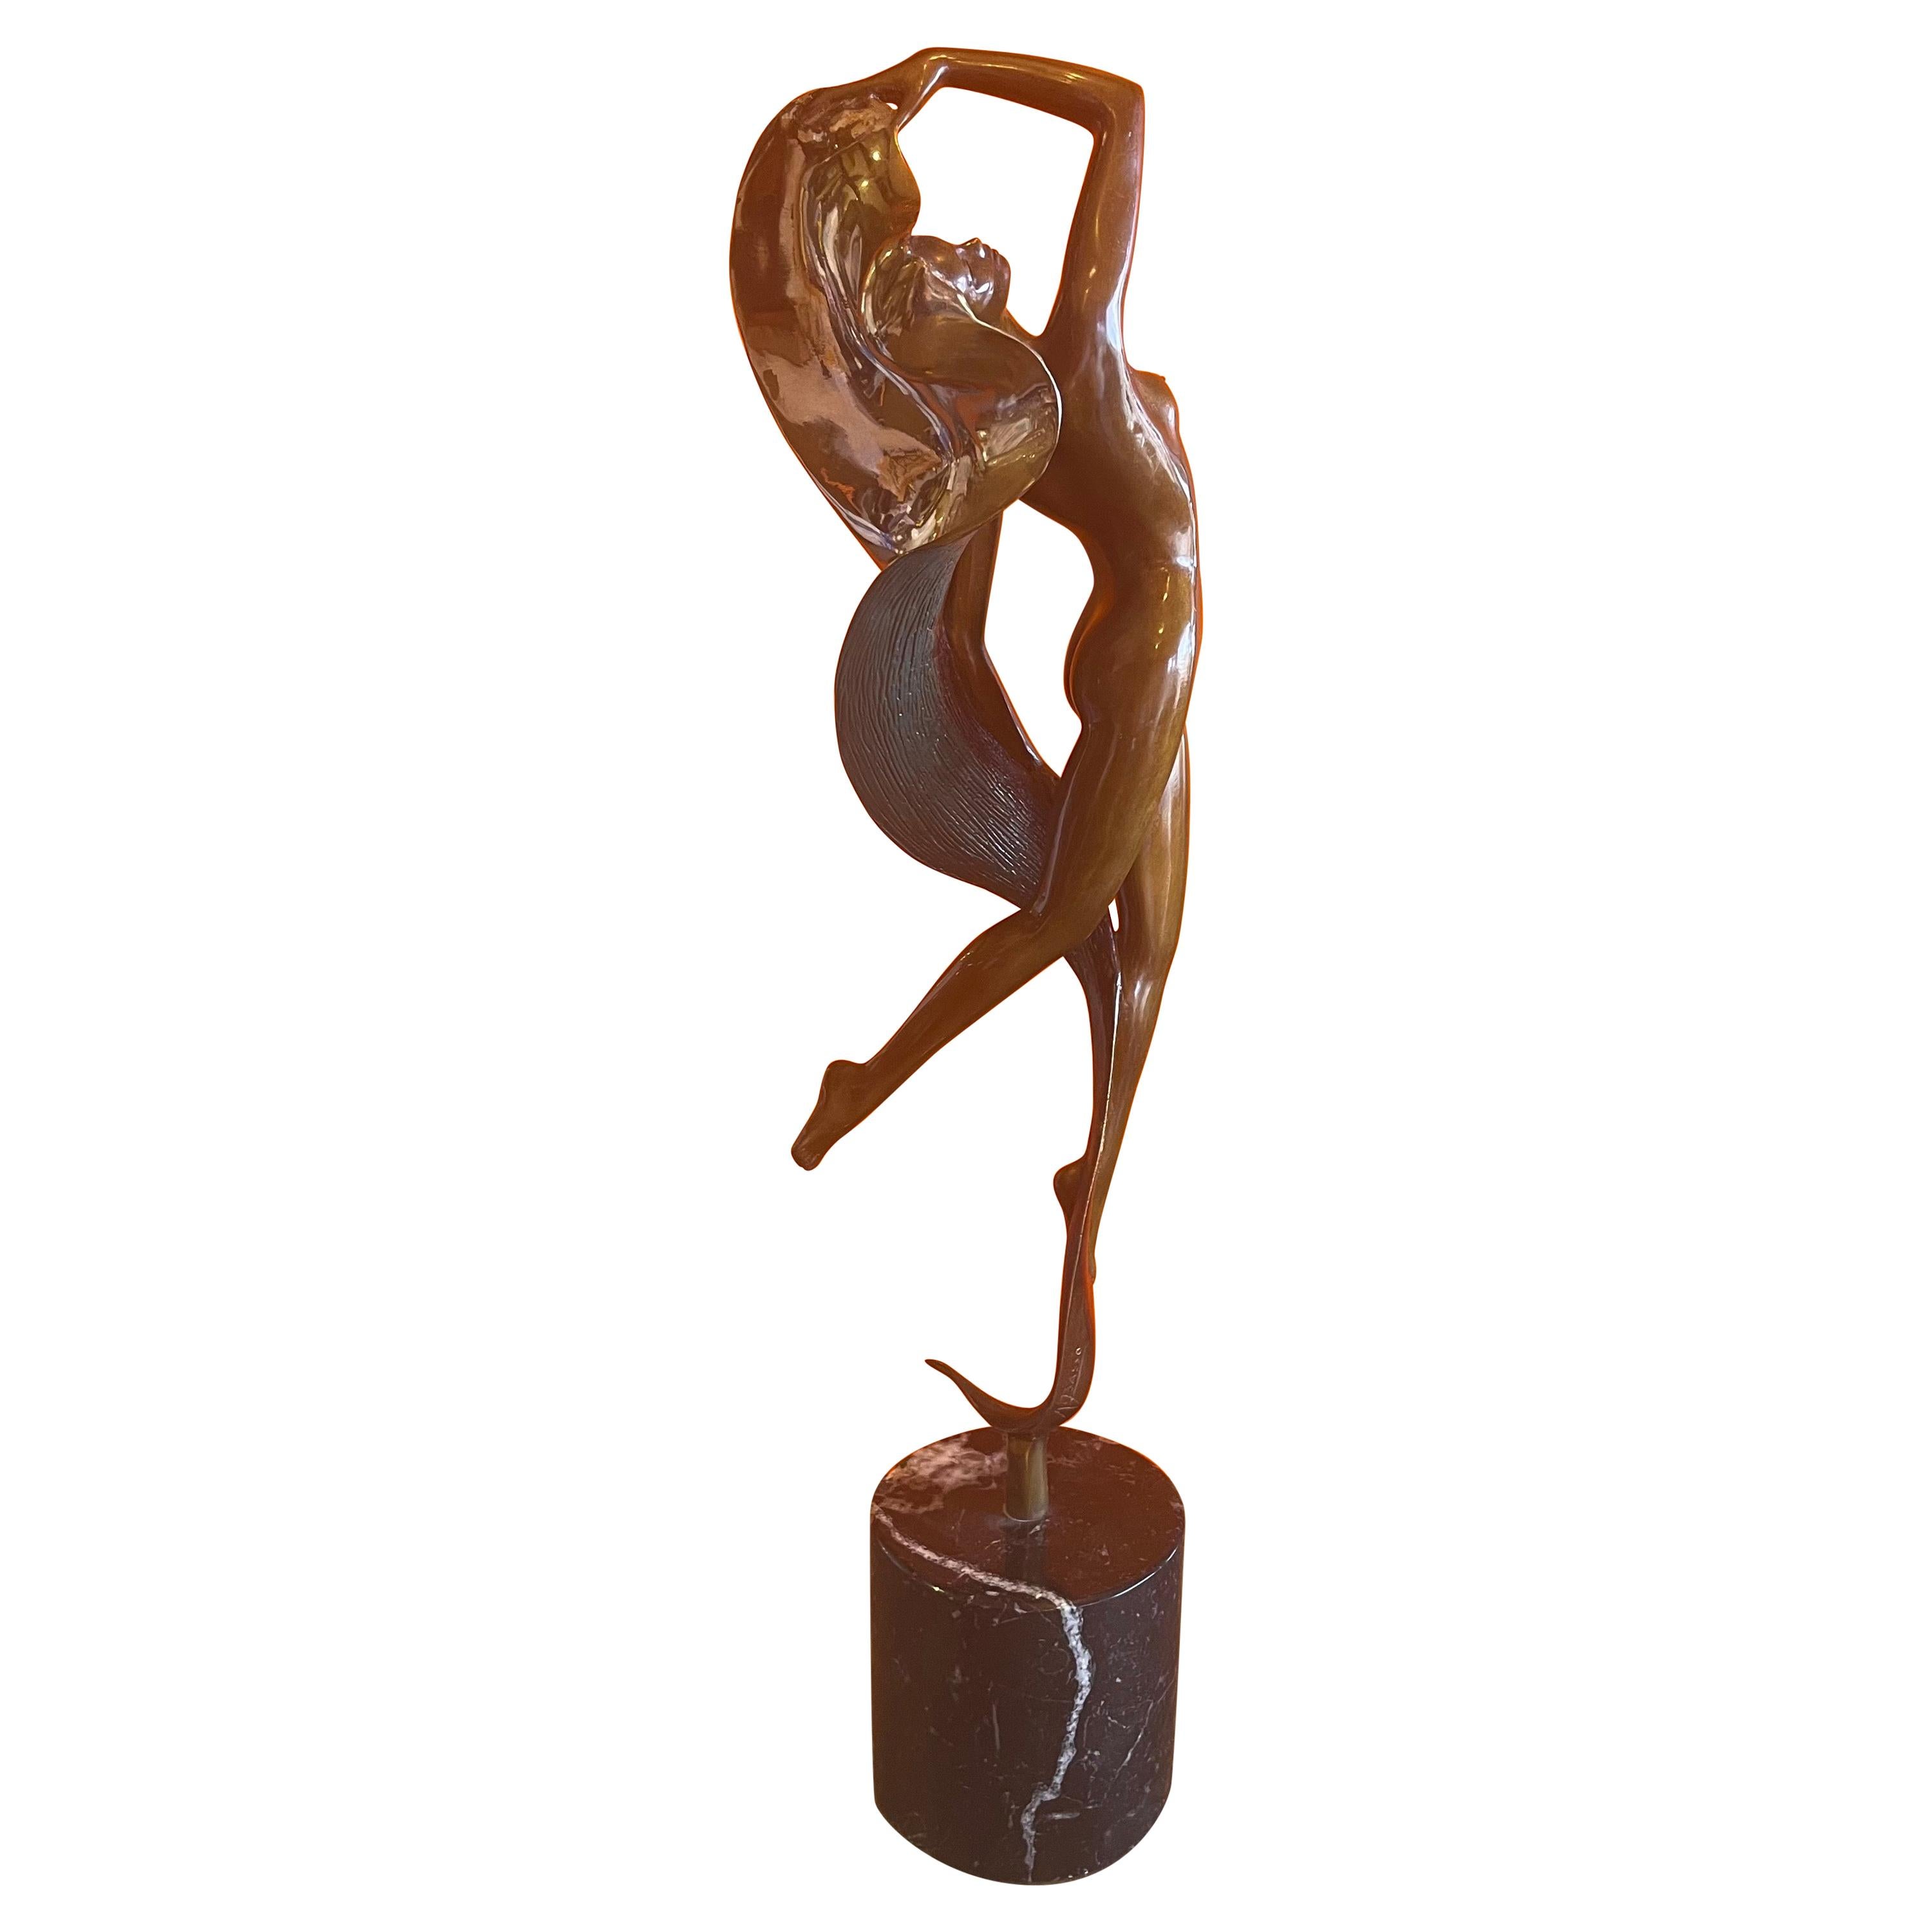 Art Deco Bronze Sculpture Entitled "Dance Step" by Angelo Basso For Sale